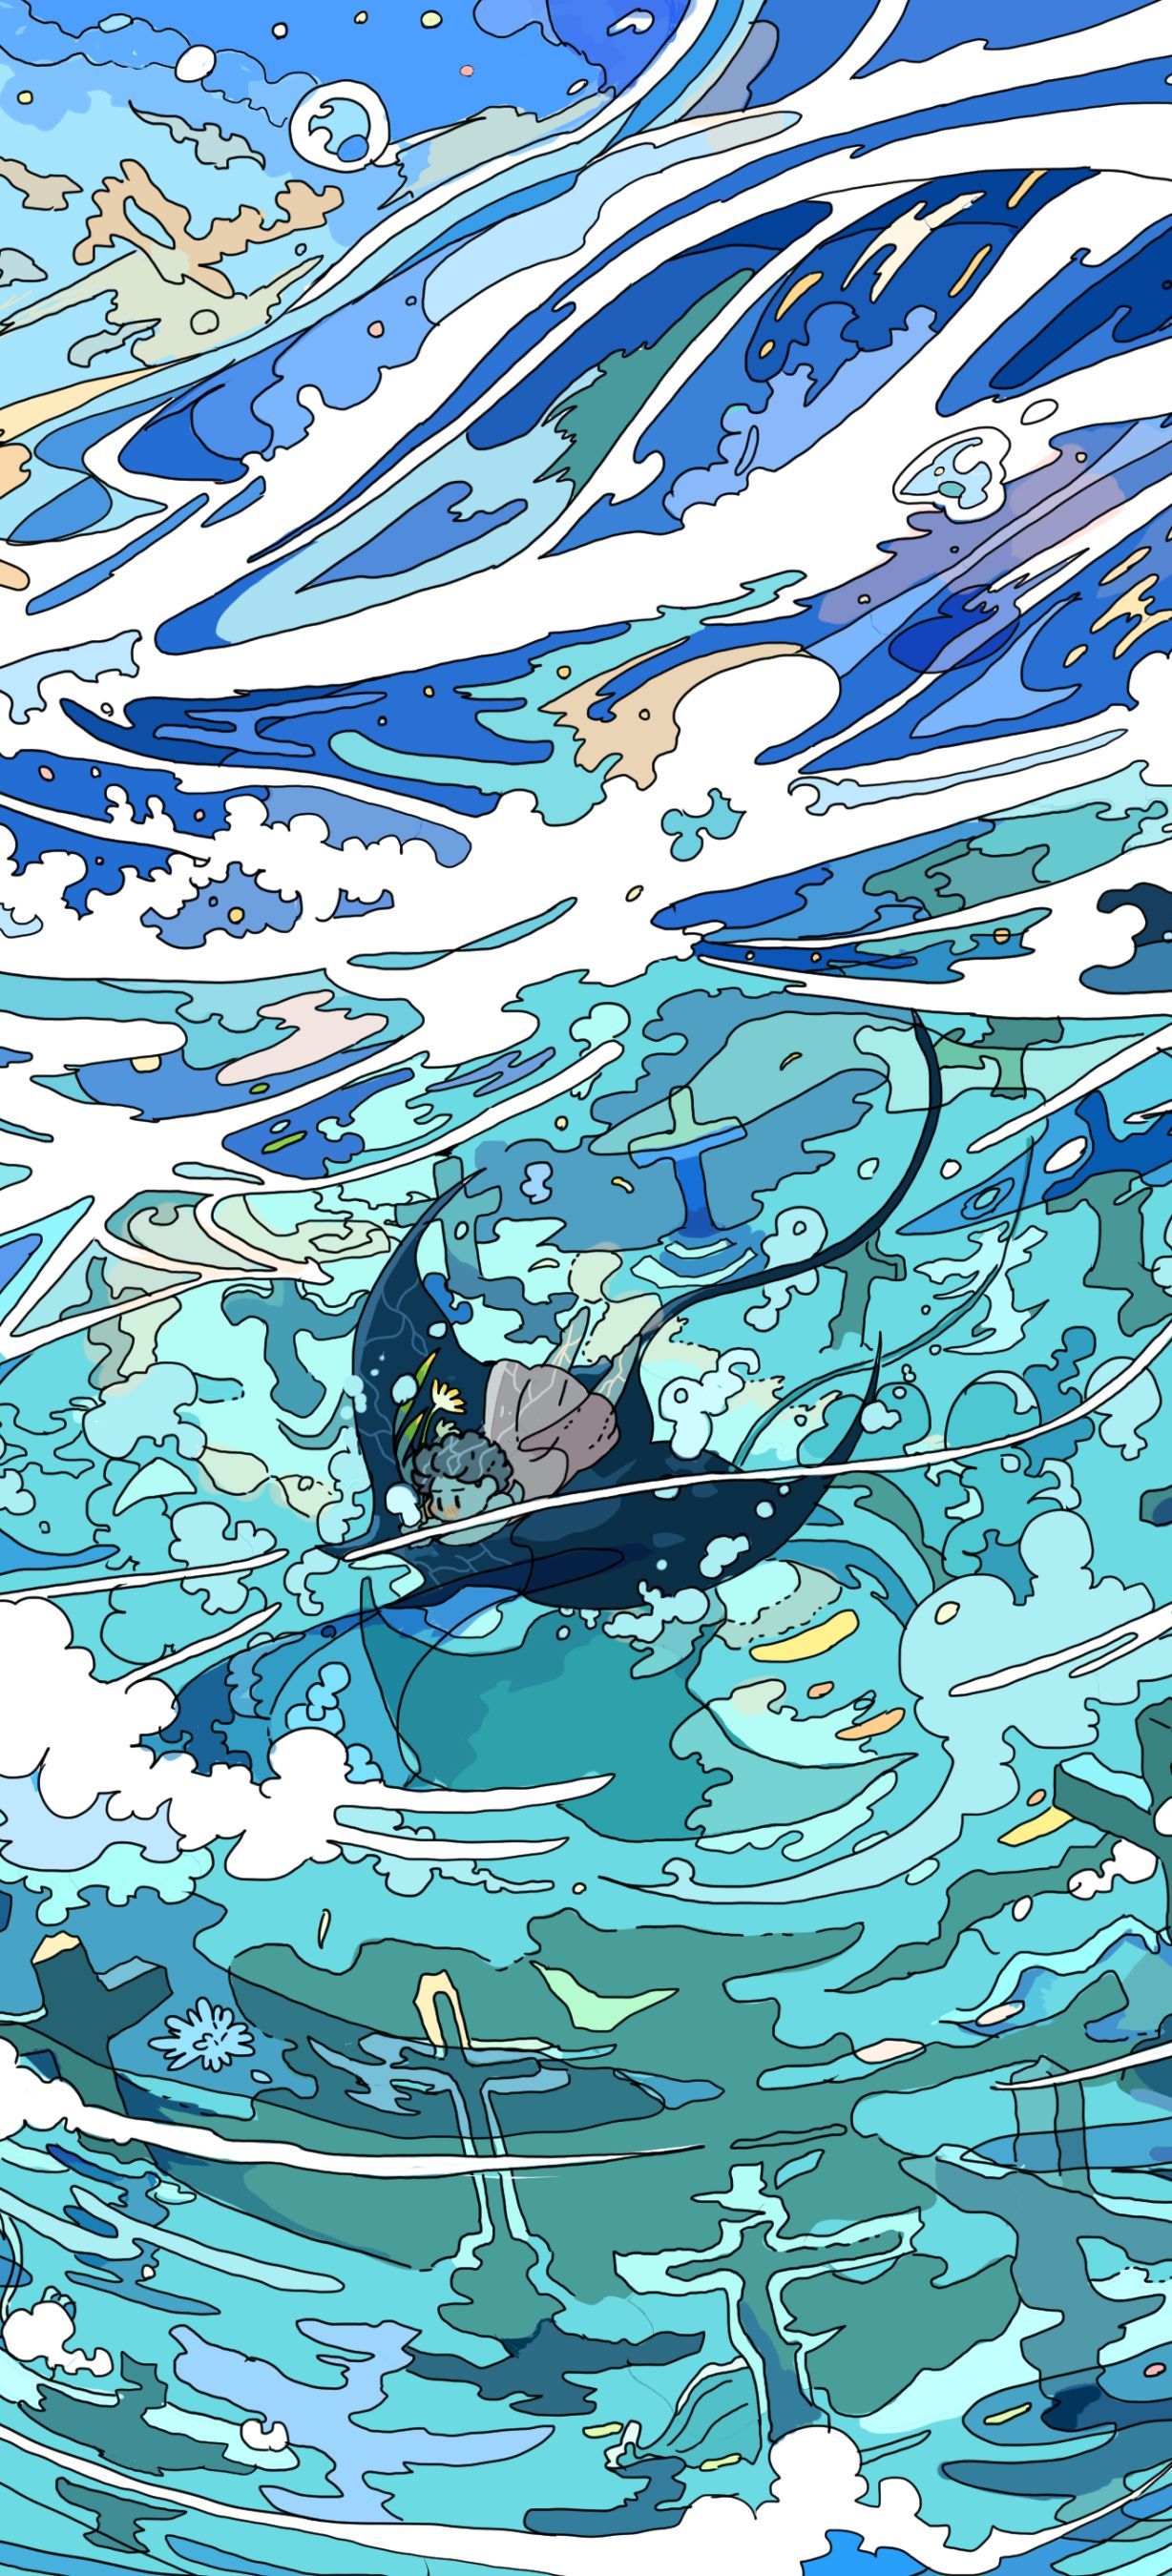 A blue and white illustration of a person in a boat on a choppy sea - Underwater